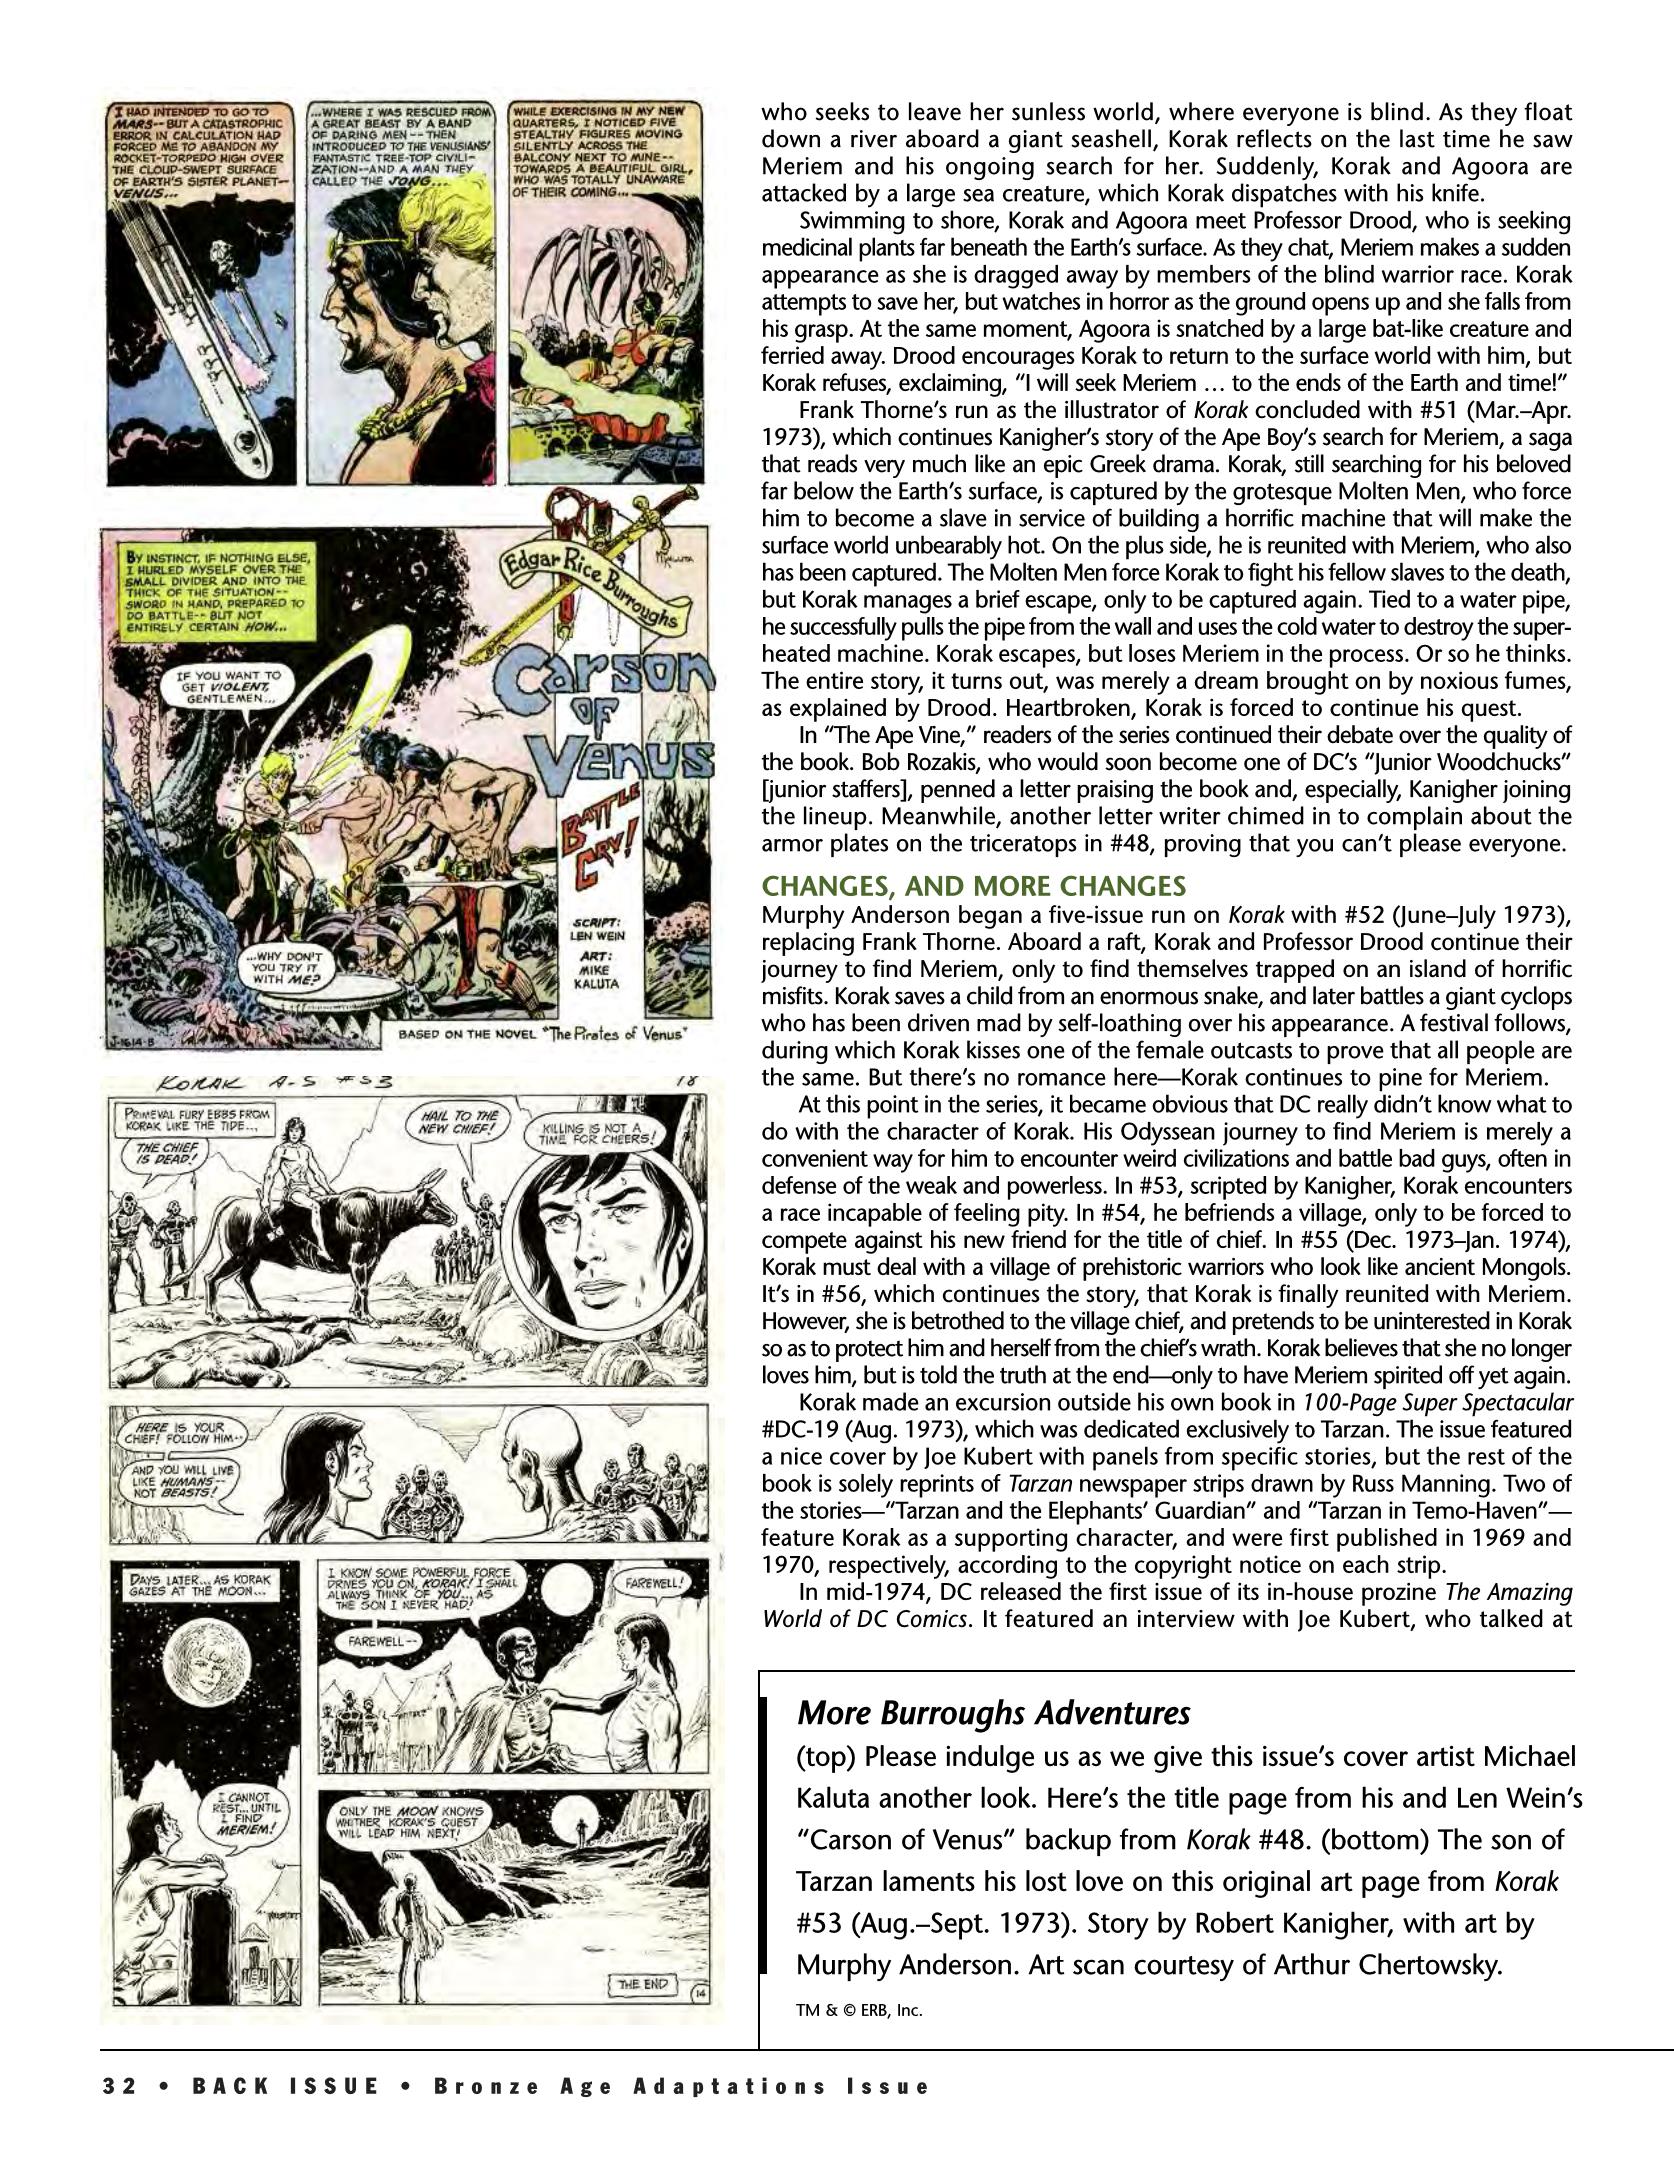 Read online Back Issue comic -  Issue #89 - 28